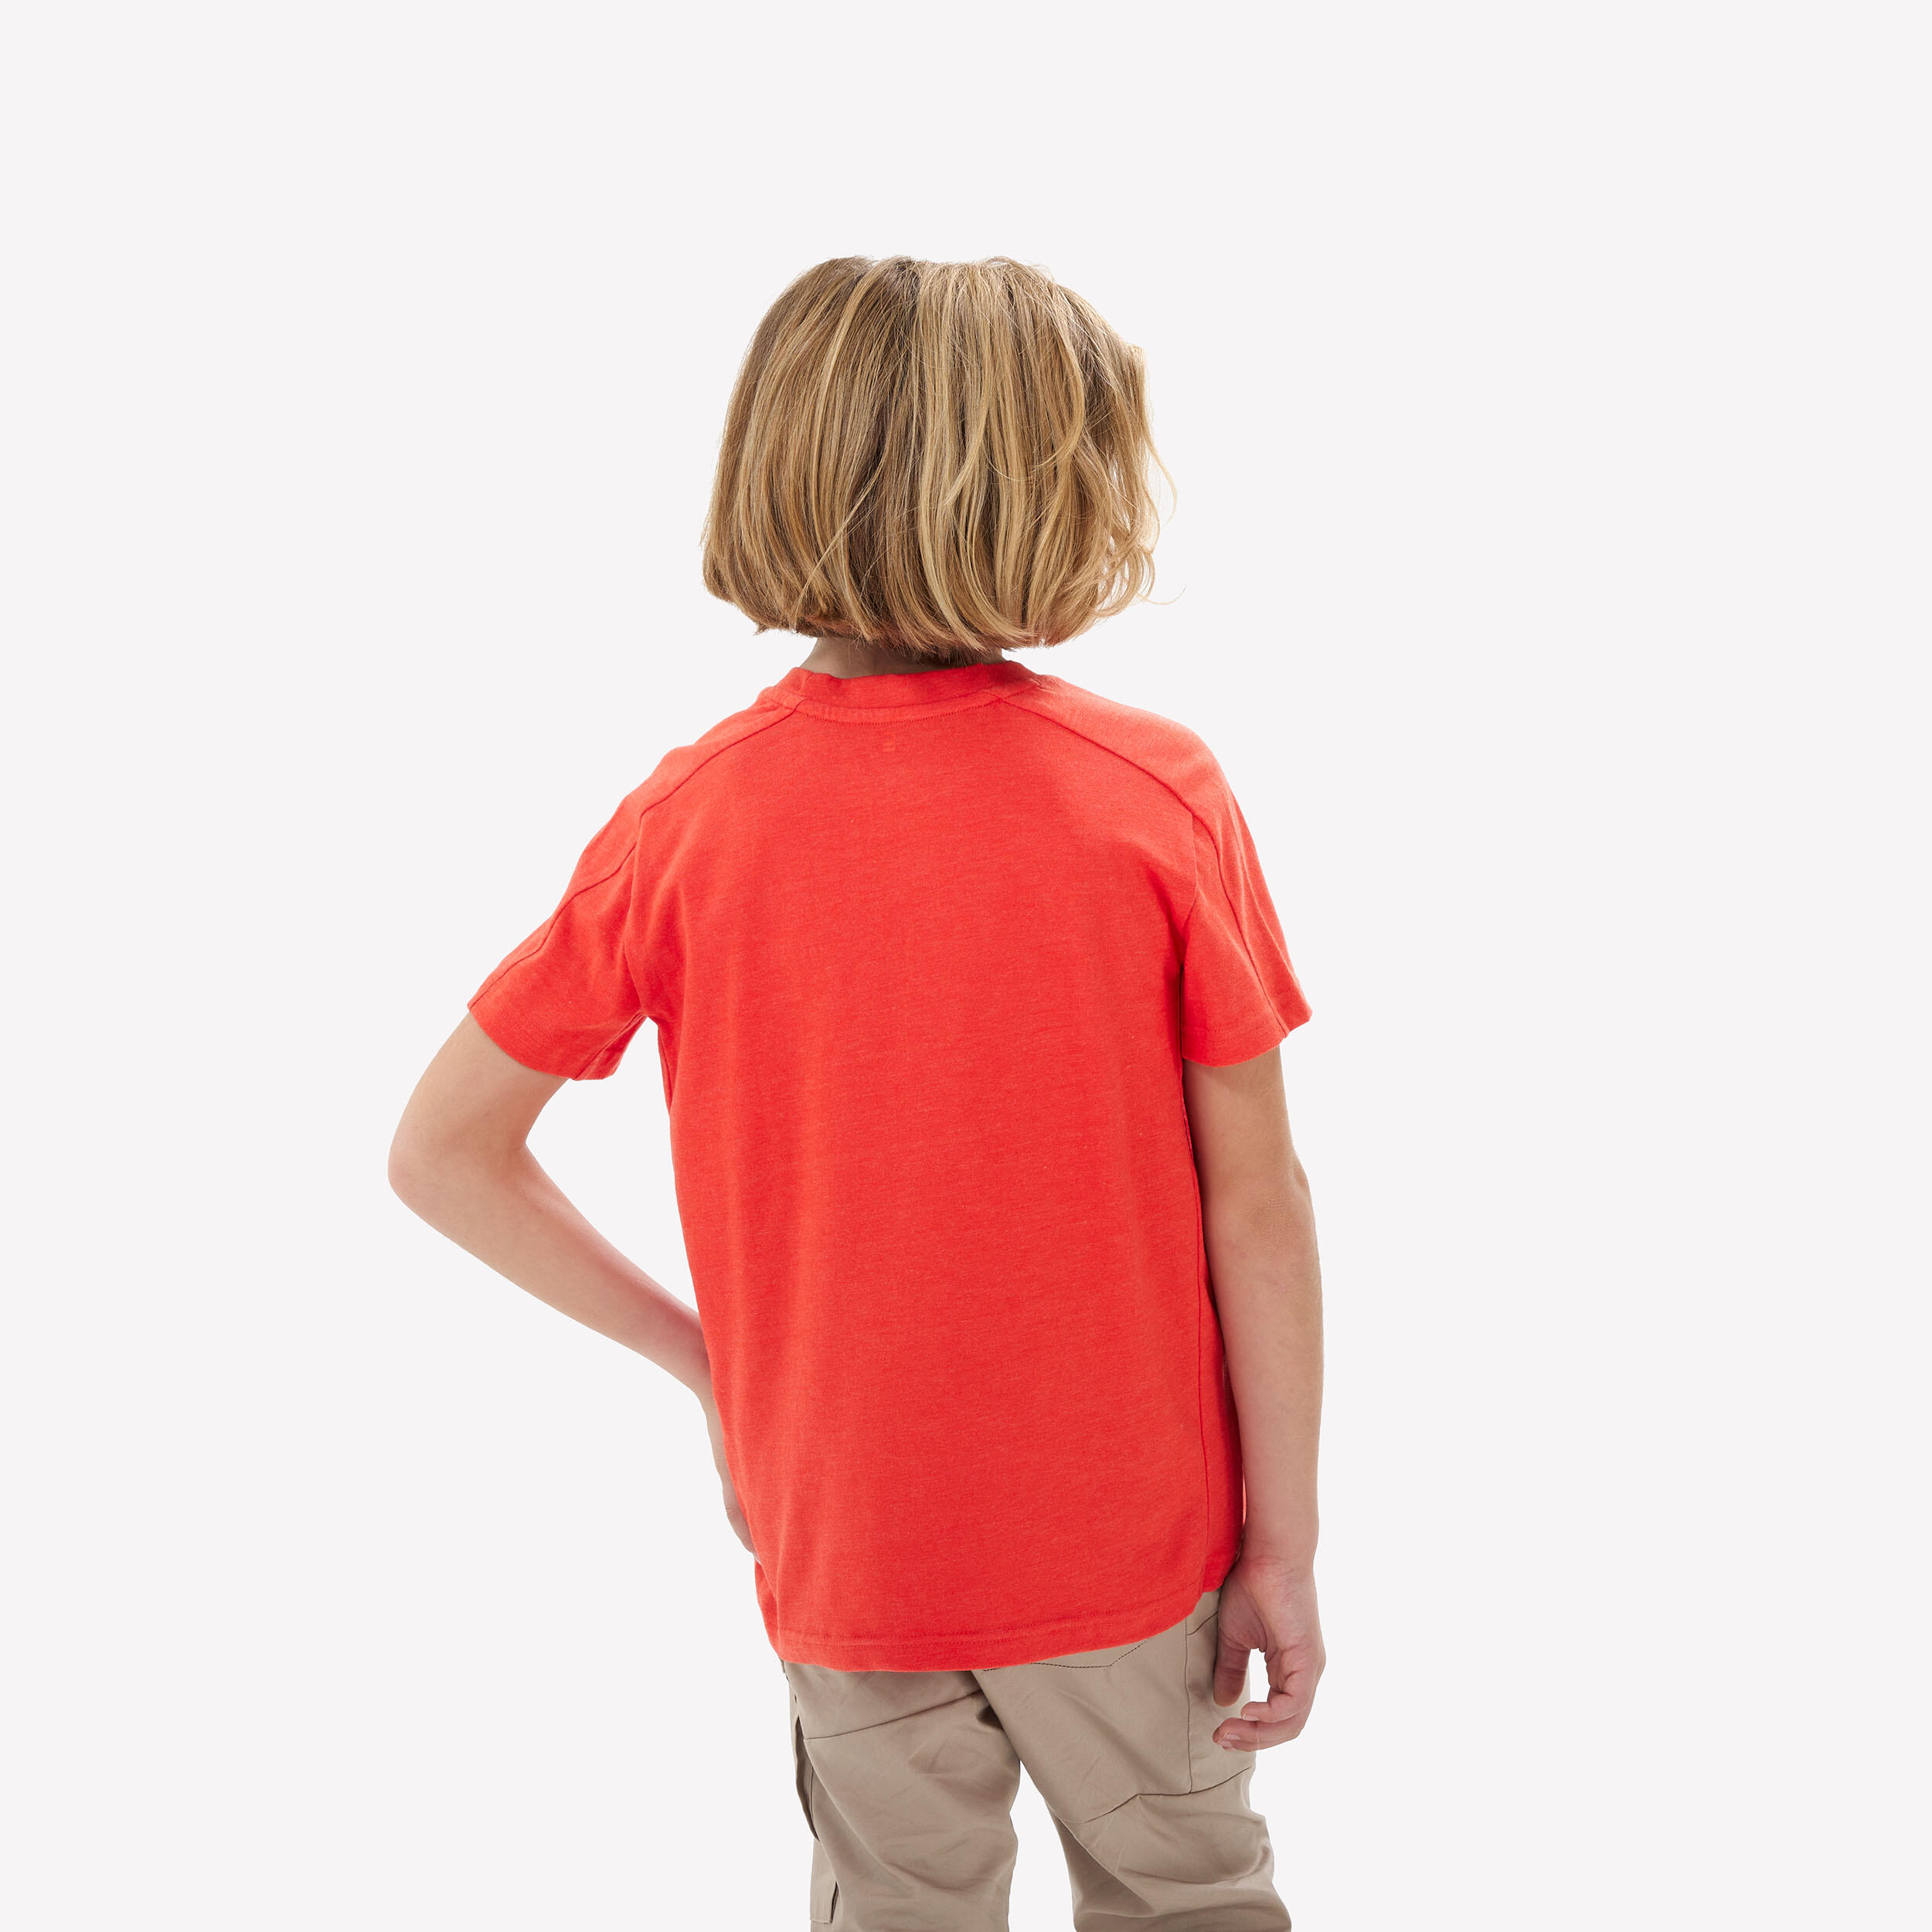 Kids’ Hiking T-Shirt - MH100 Ages 7-15 - Red 4/6